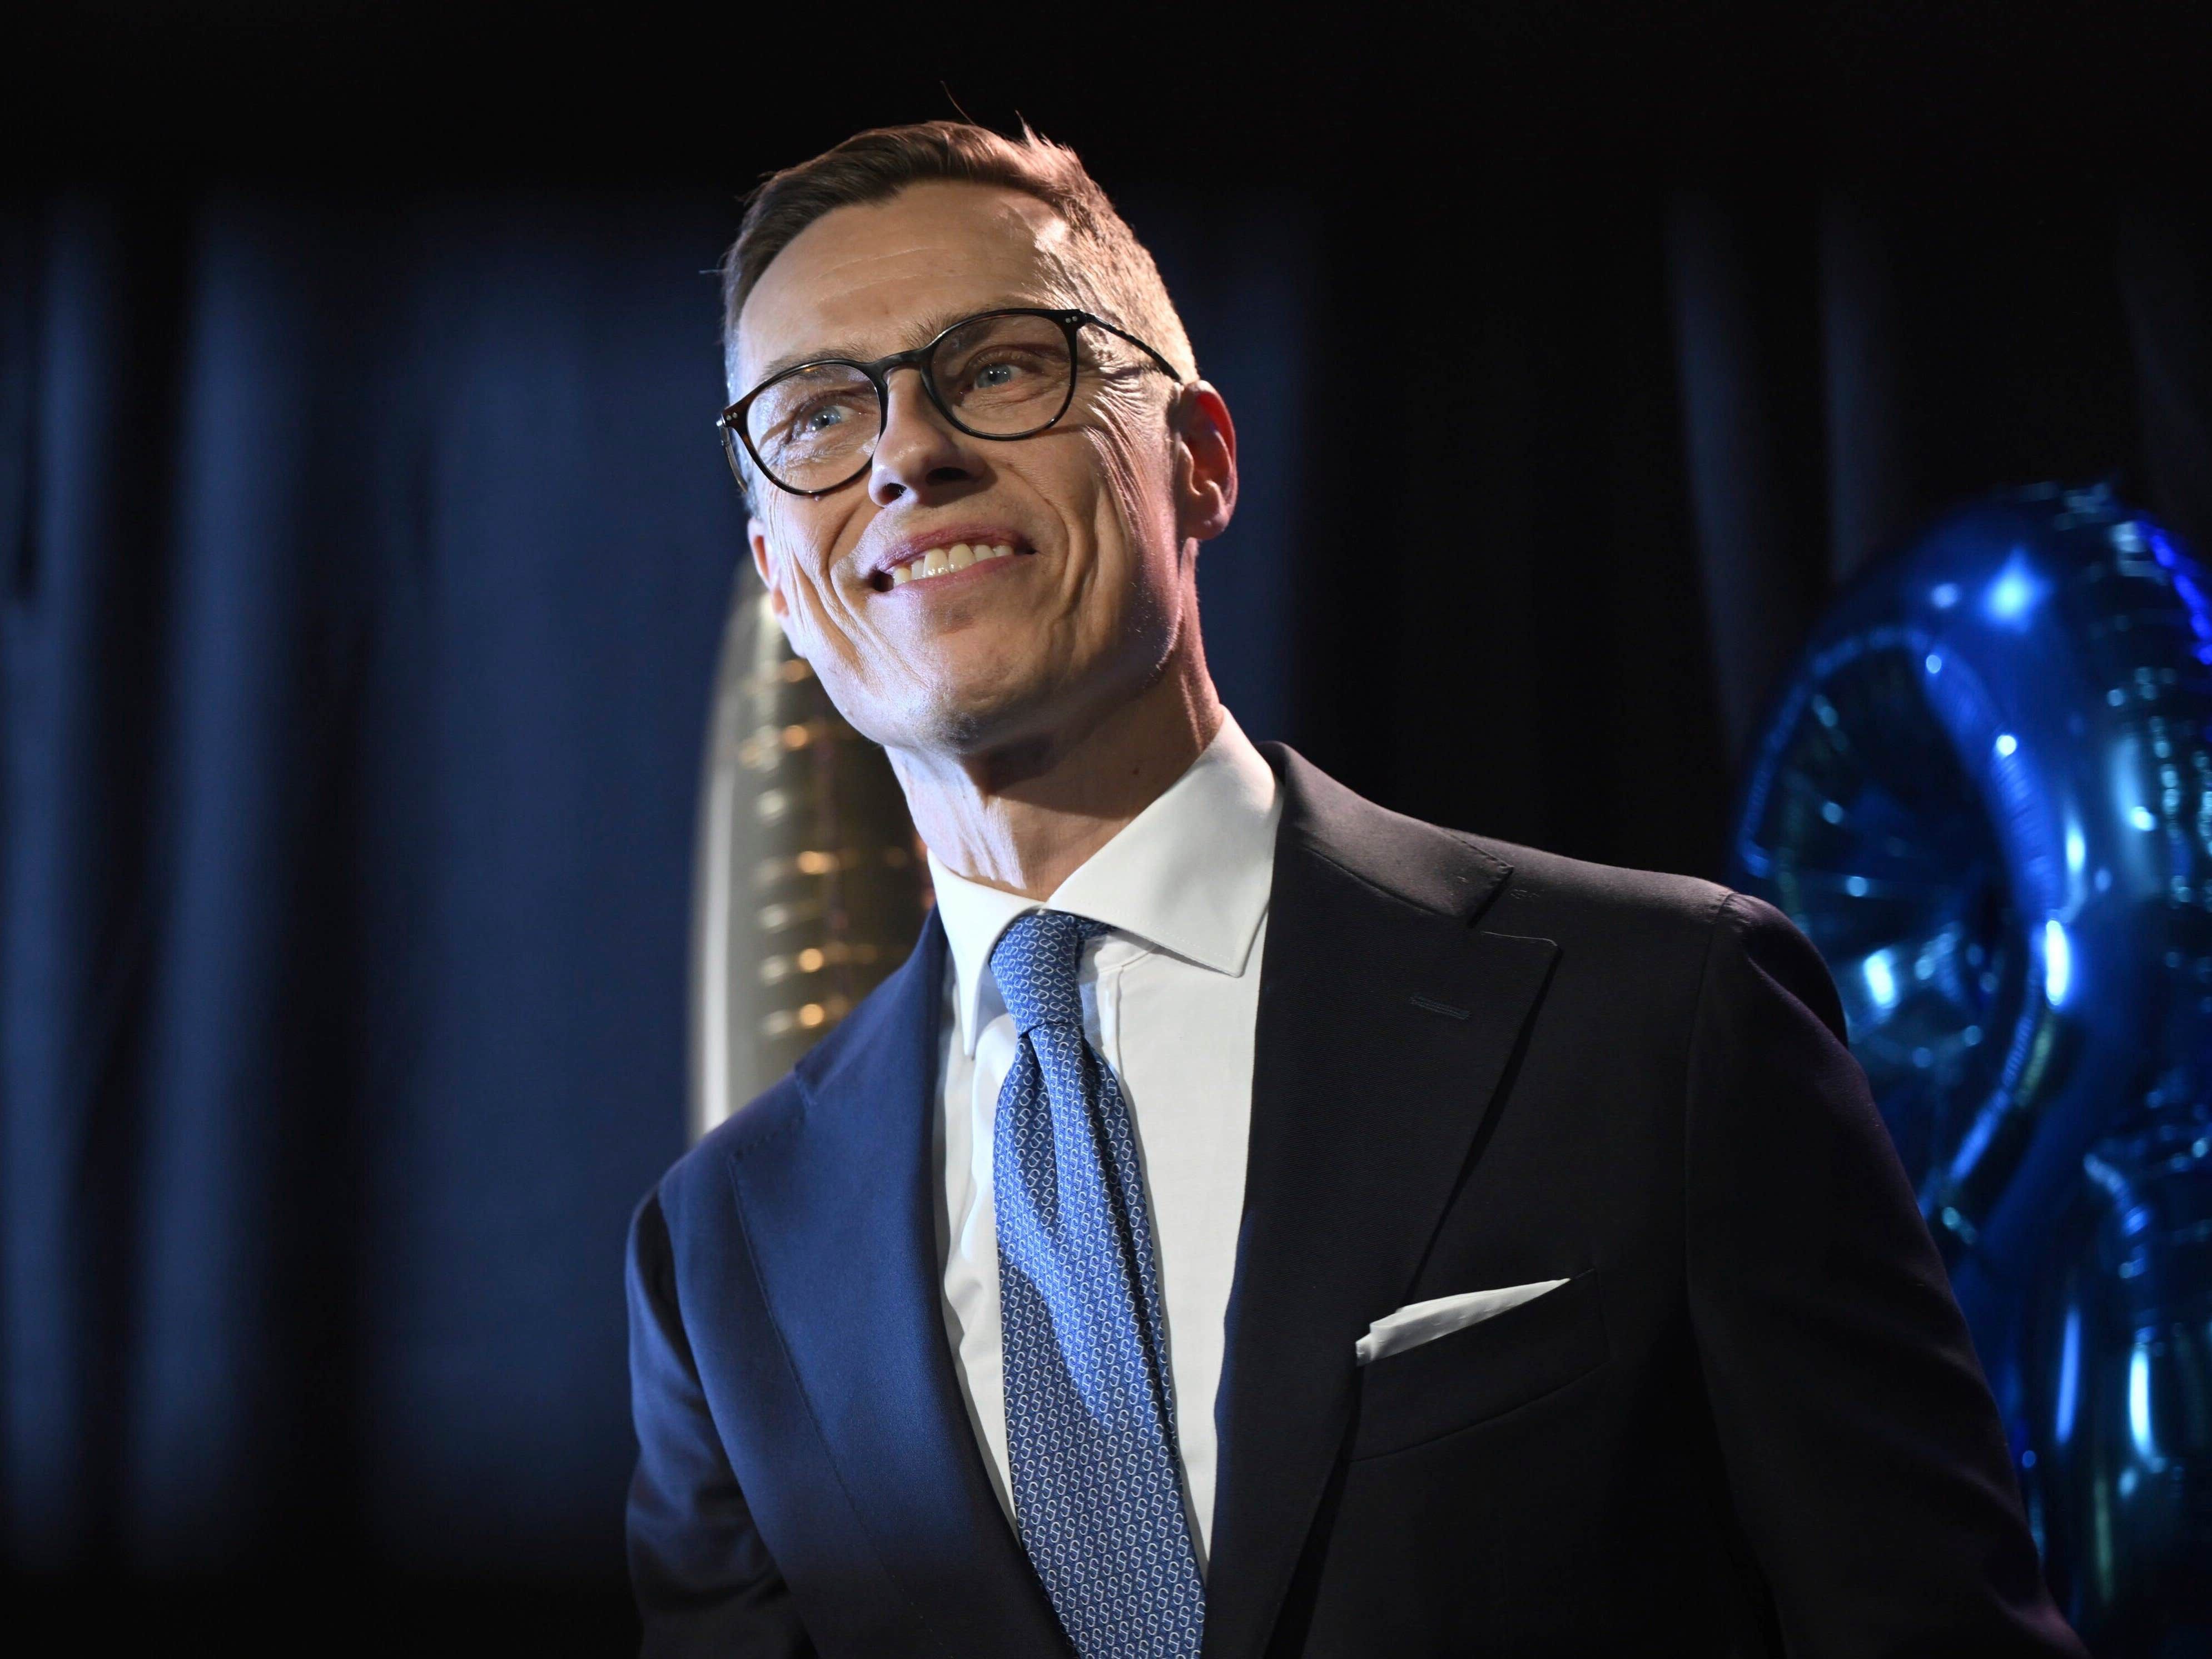 Finns choose centre-right Stubb as president, preliminary results show